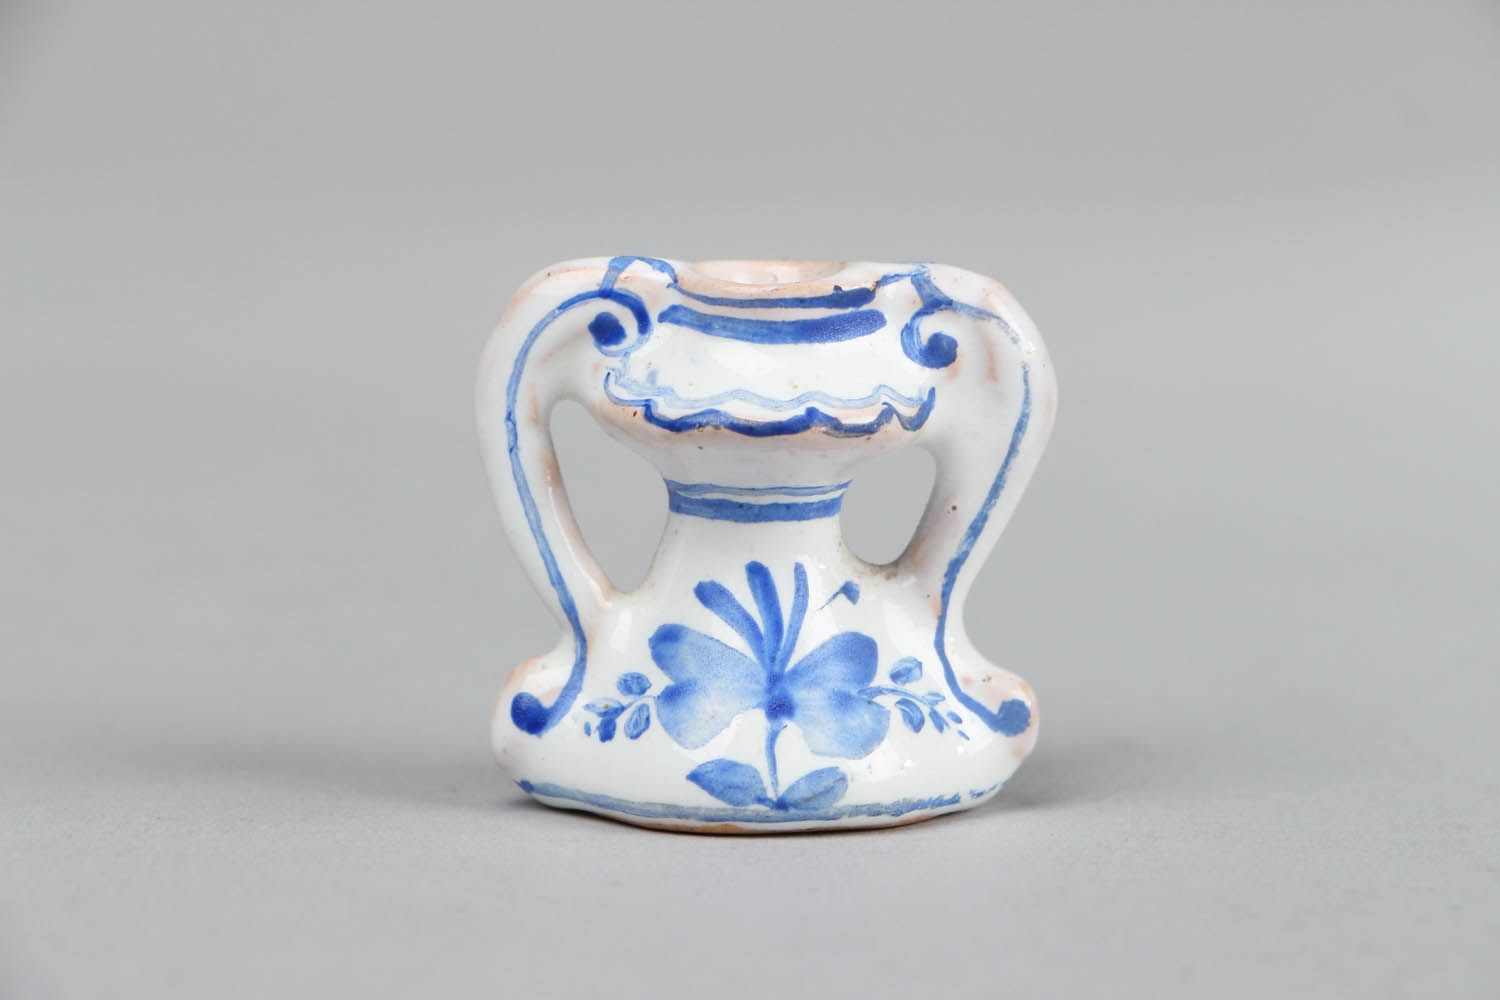 1 inch small ceramic white and blue vase with two handles 0,04 lb photo 1